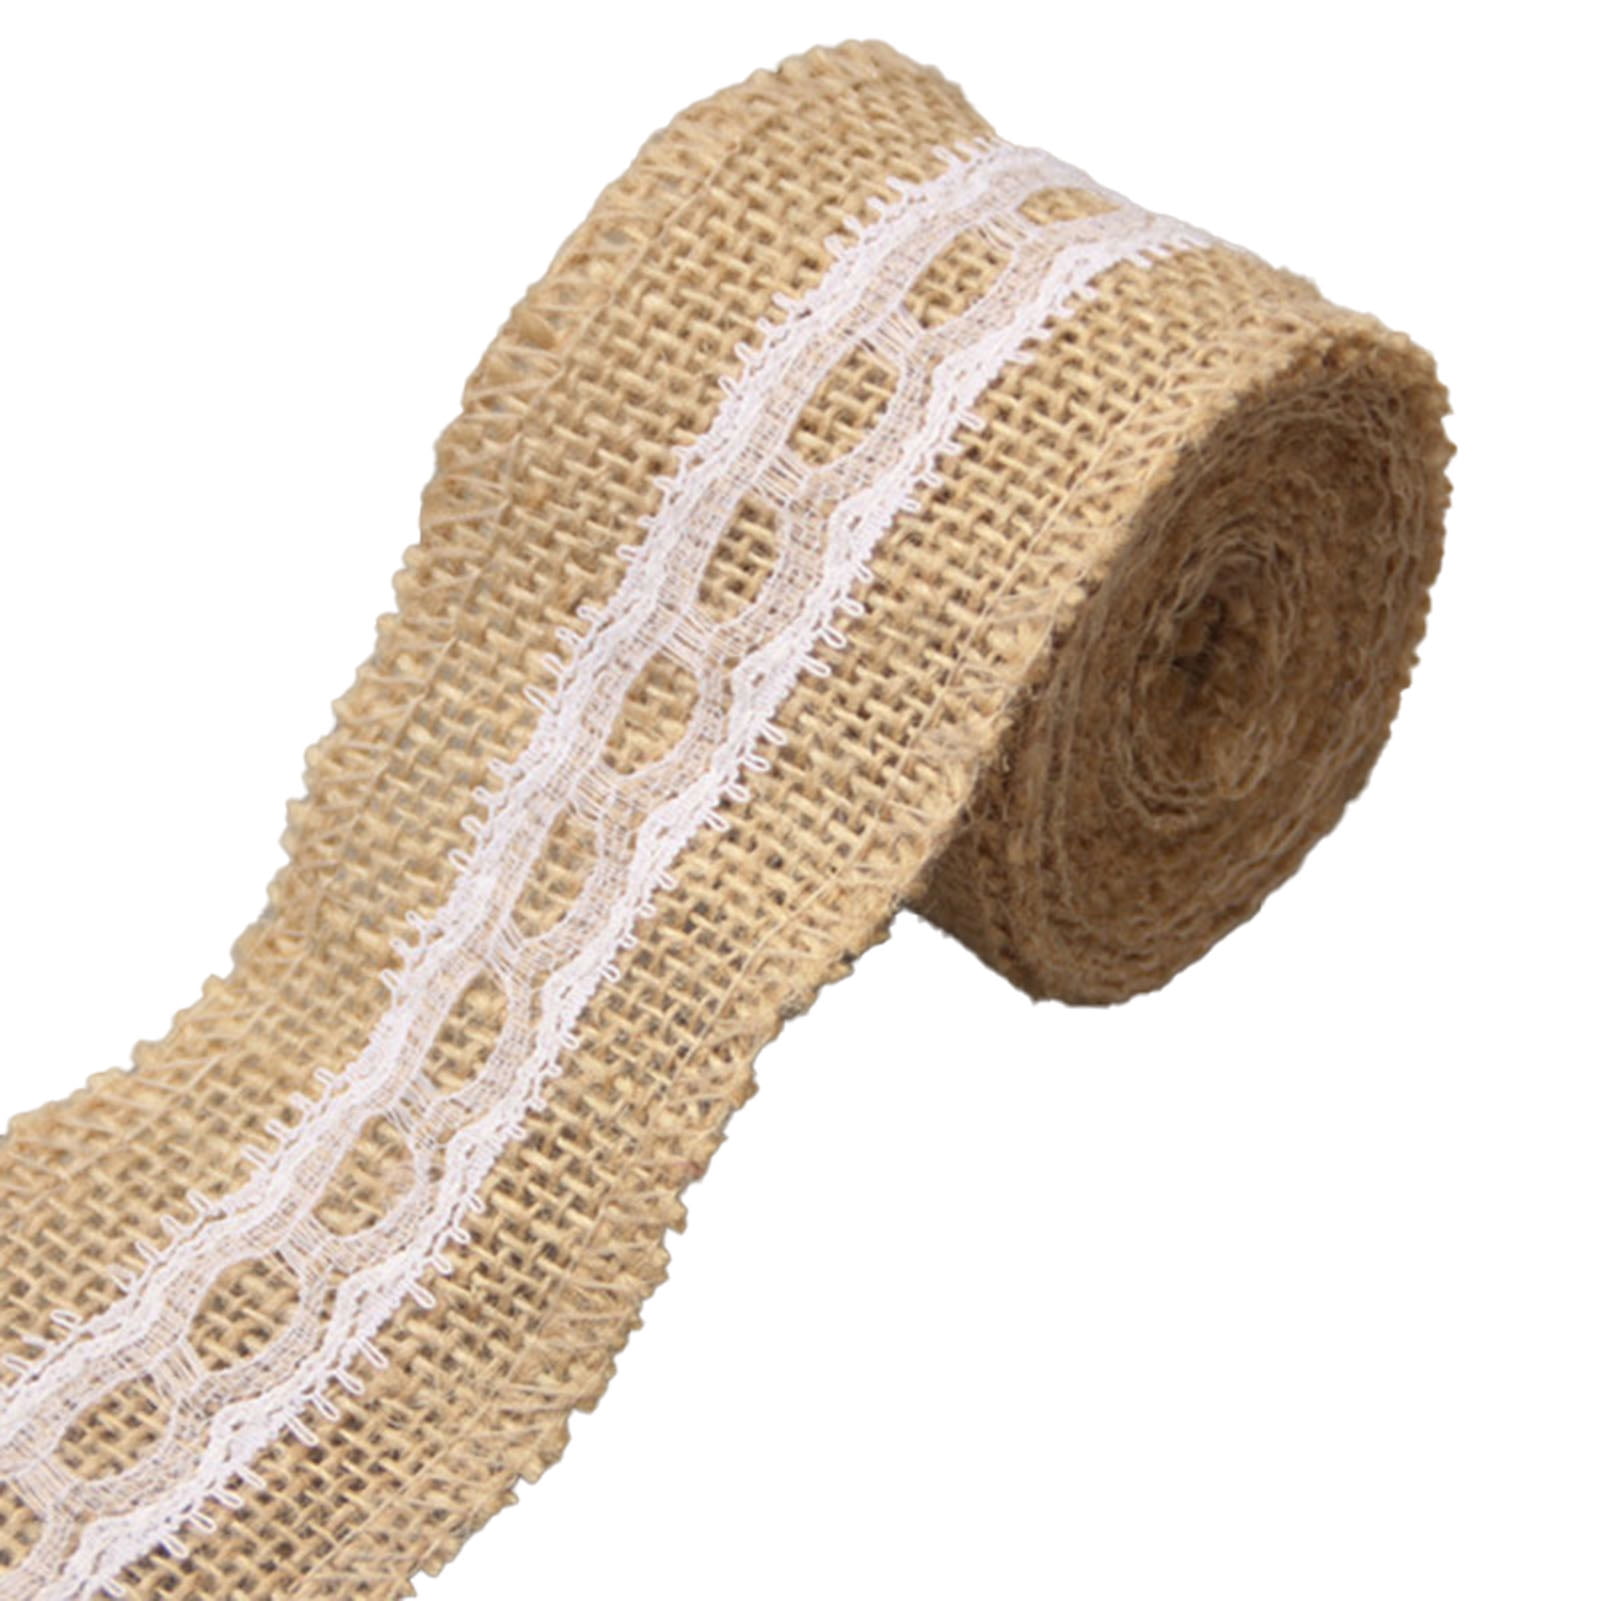 3PCS Vintage Style Lace Ribbon Natural Burlap Ribbon Rolls with Lace and Jute Ribbon with White Lace Ribbon Roll for DIY Decoration and Gift Wrapping 